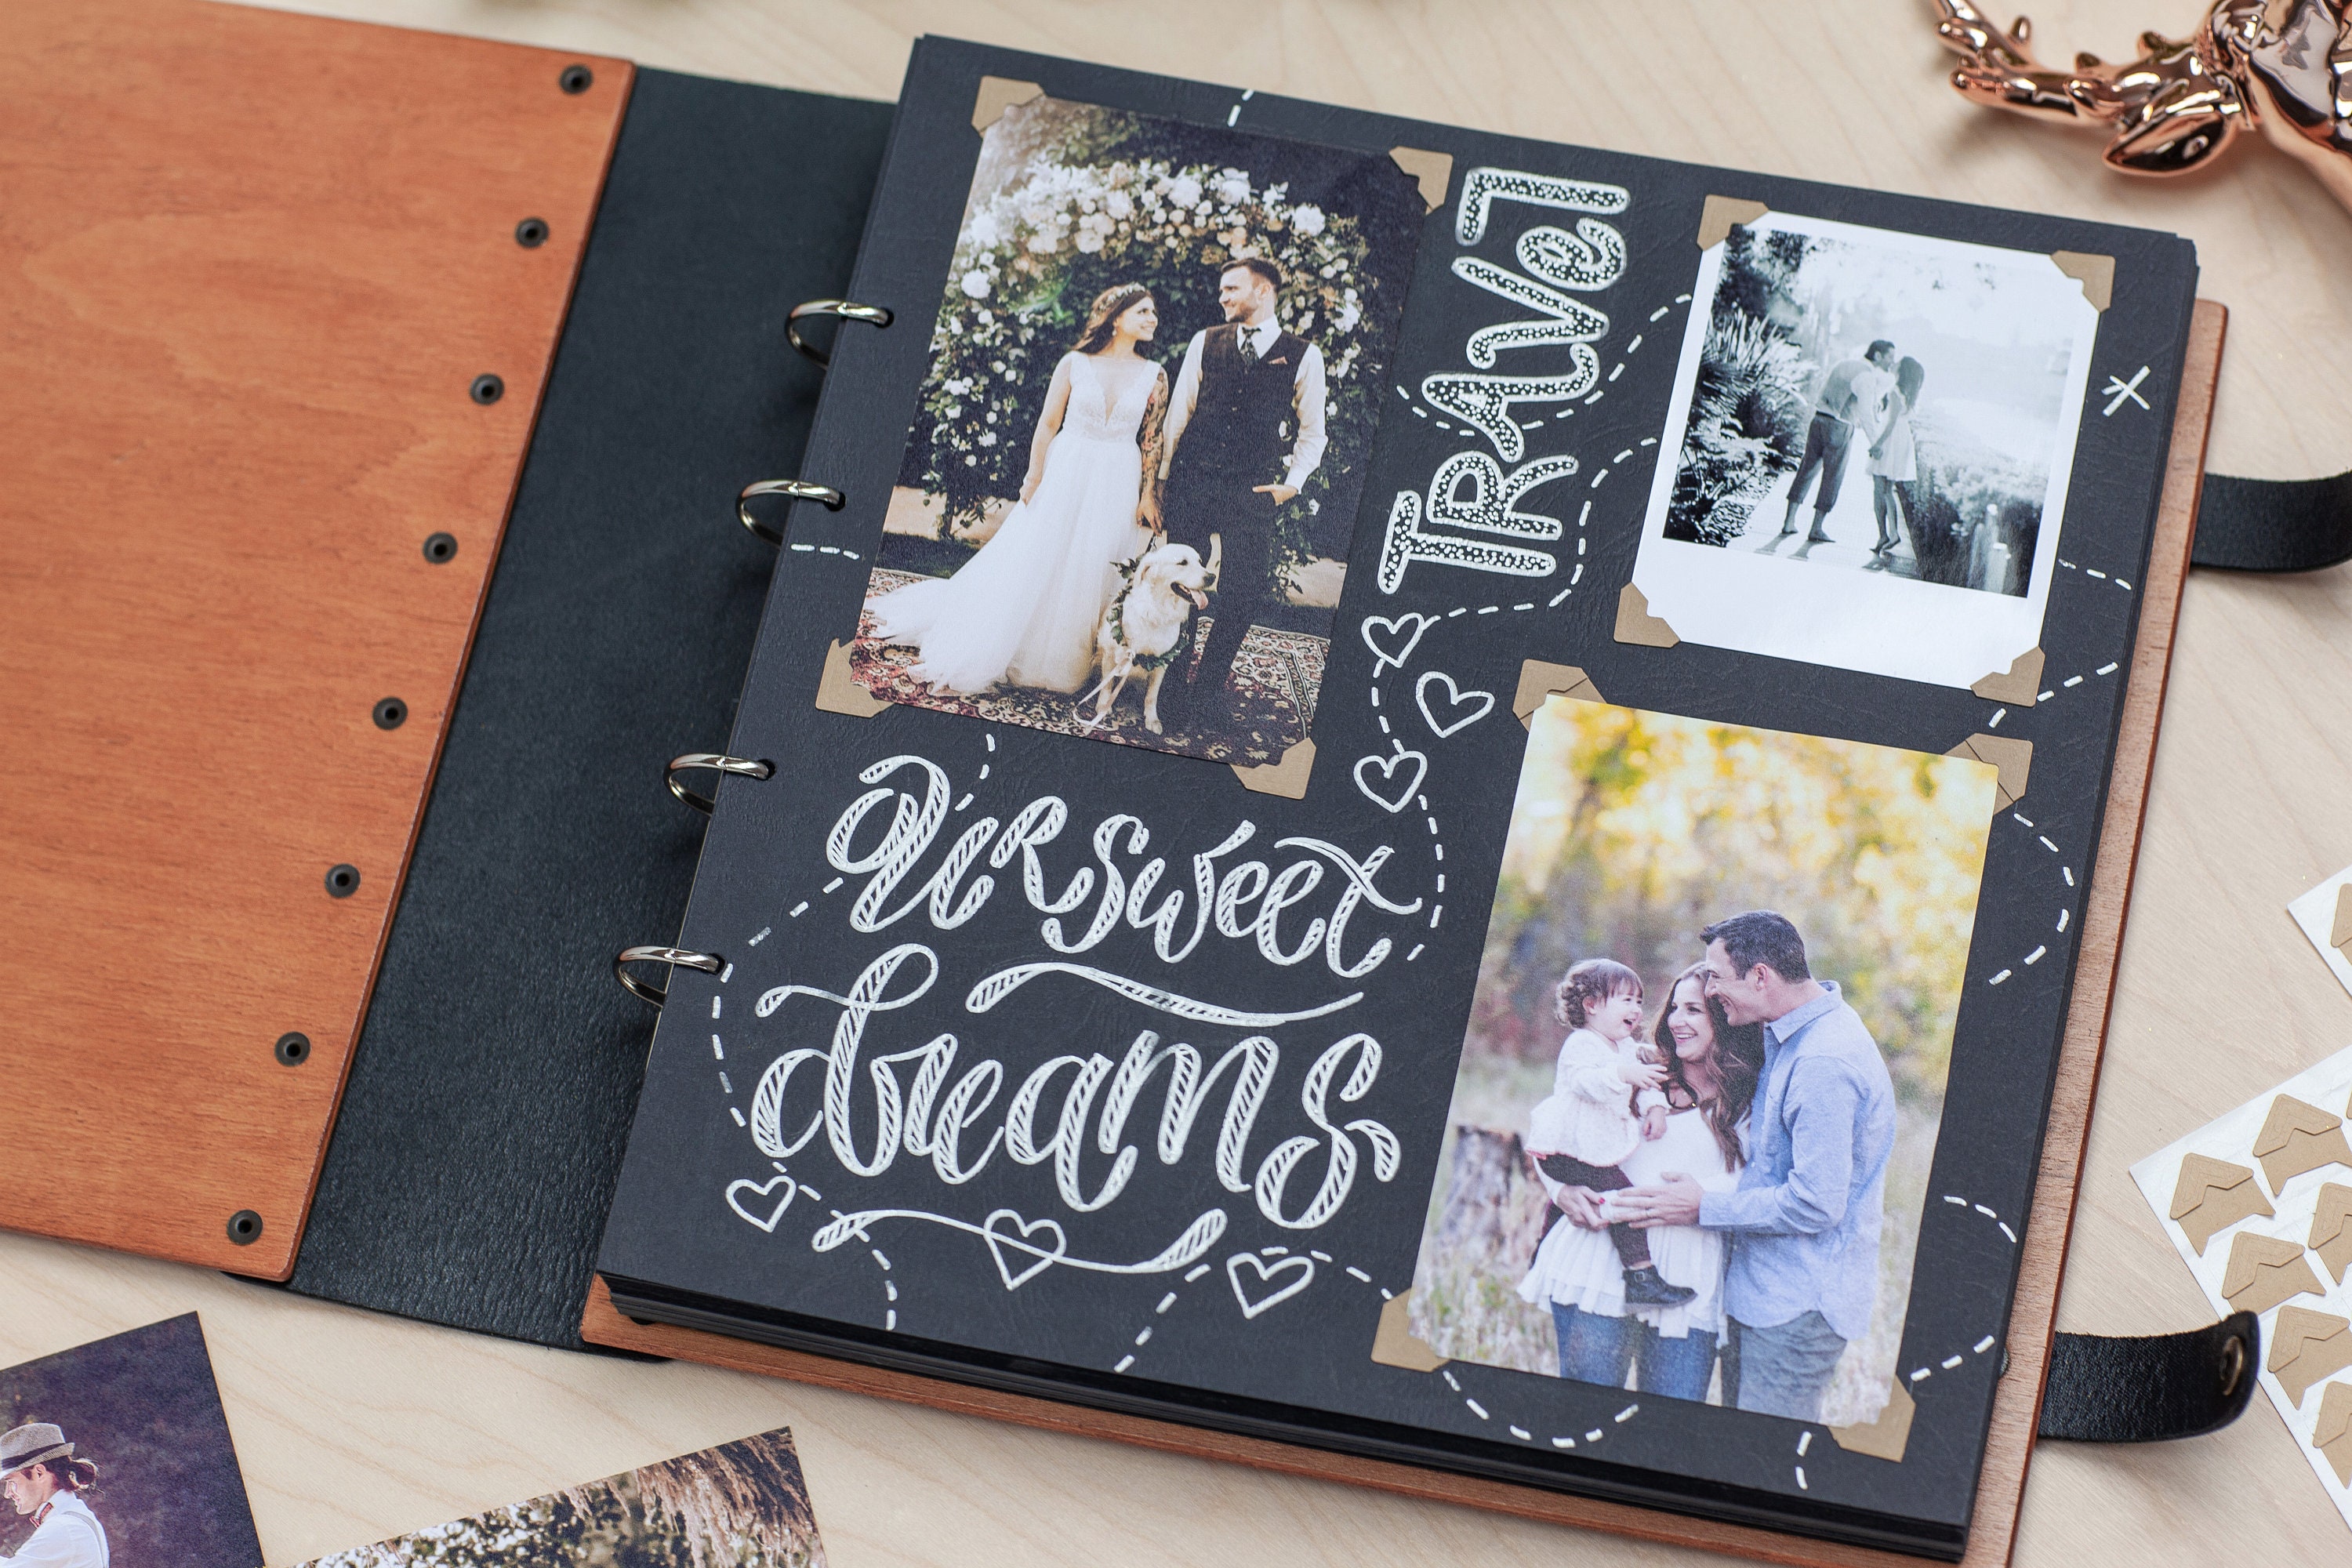 Buy Retail Décor Couple Scrapbook Photo Albums / Photo Dairy For Memories  30 Pages Size (8.5x6) inch Online at Low Prices in India 